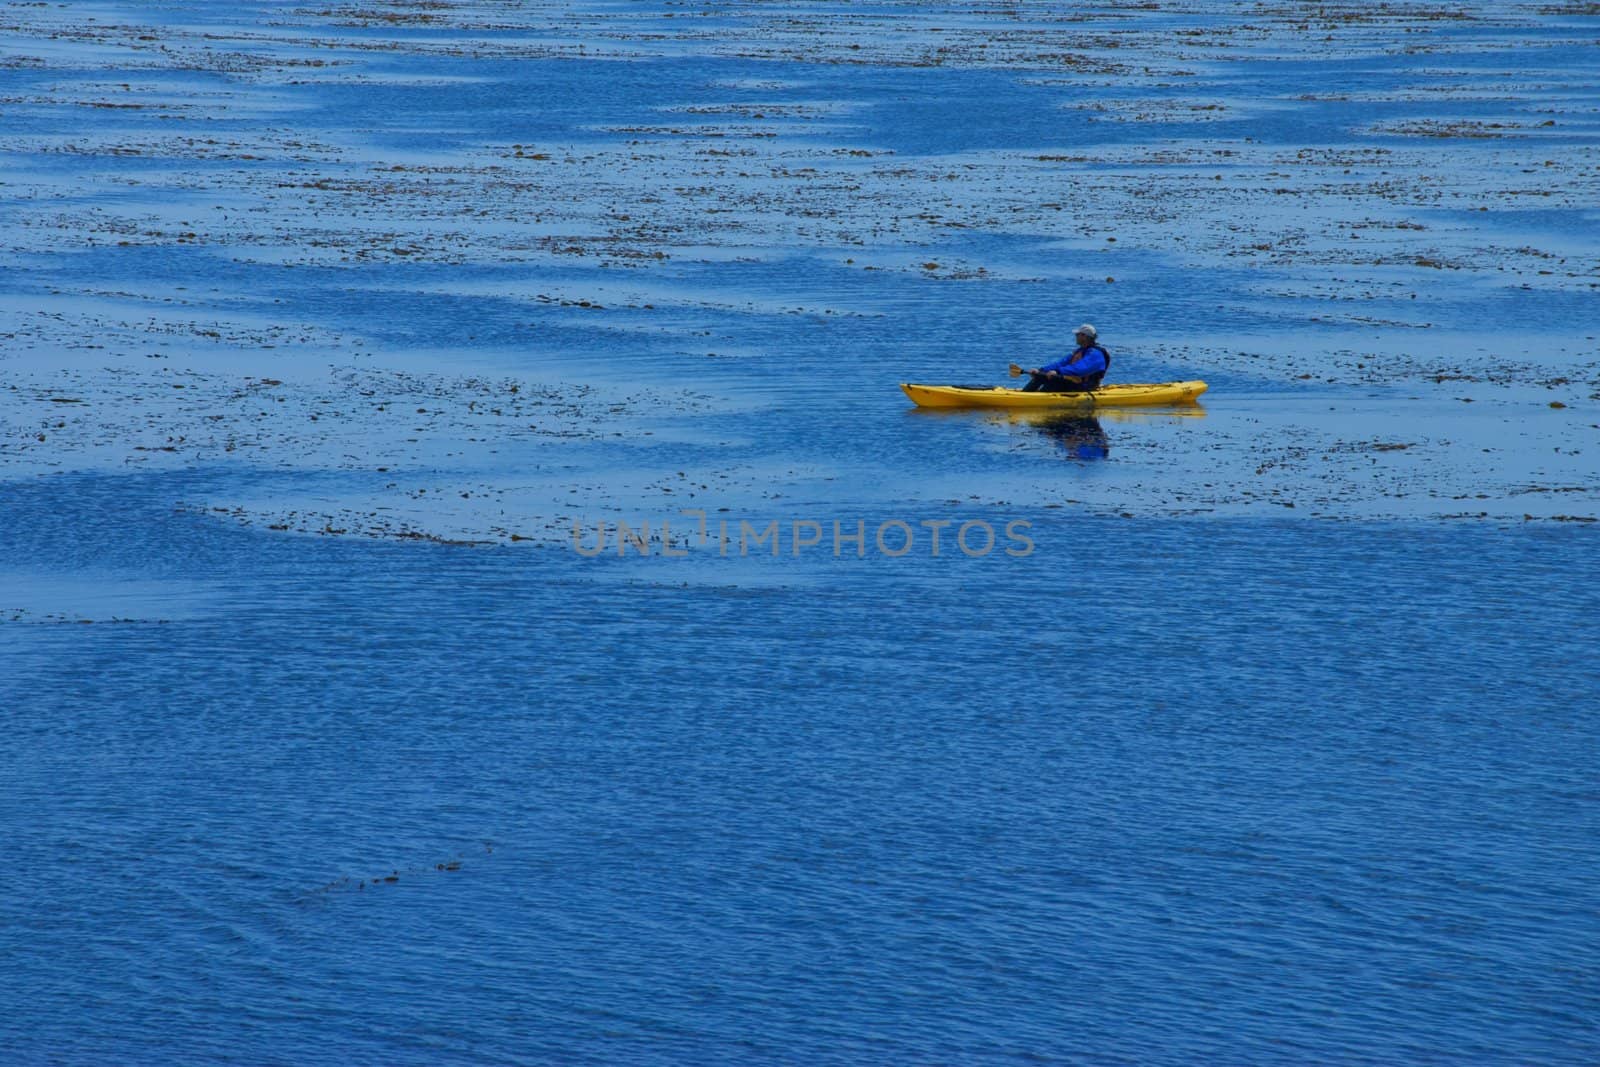 A man, who's face is obscure, is in a bright yellow sea kayak floating in a patch of sea weeds